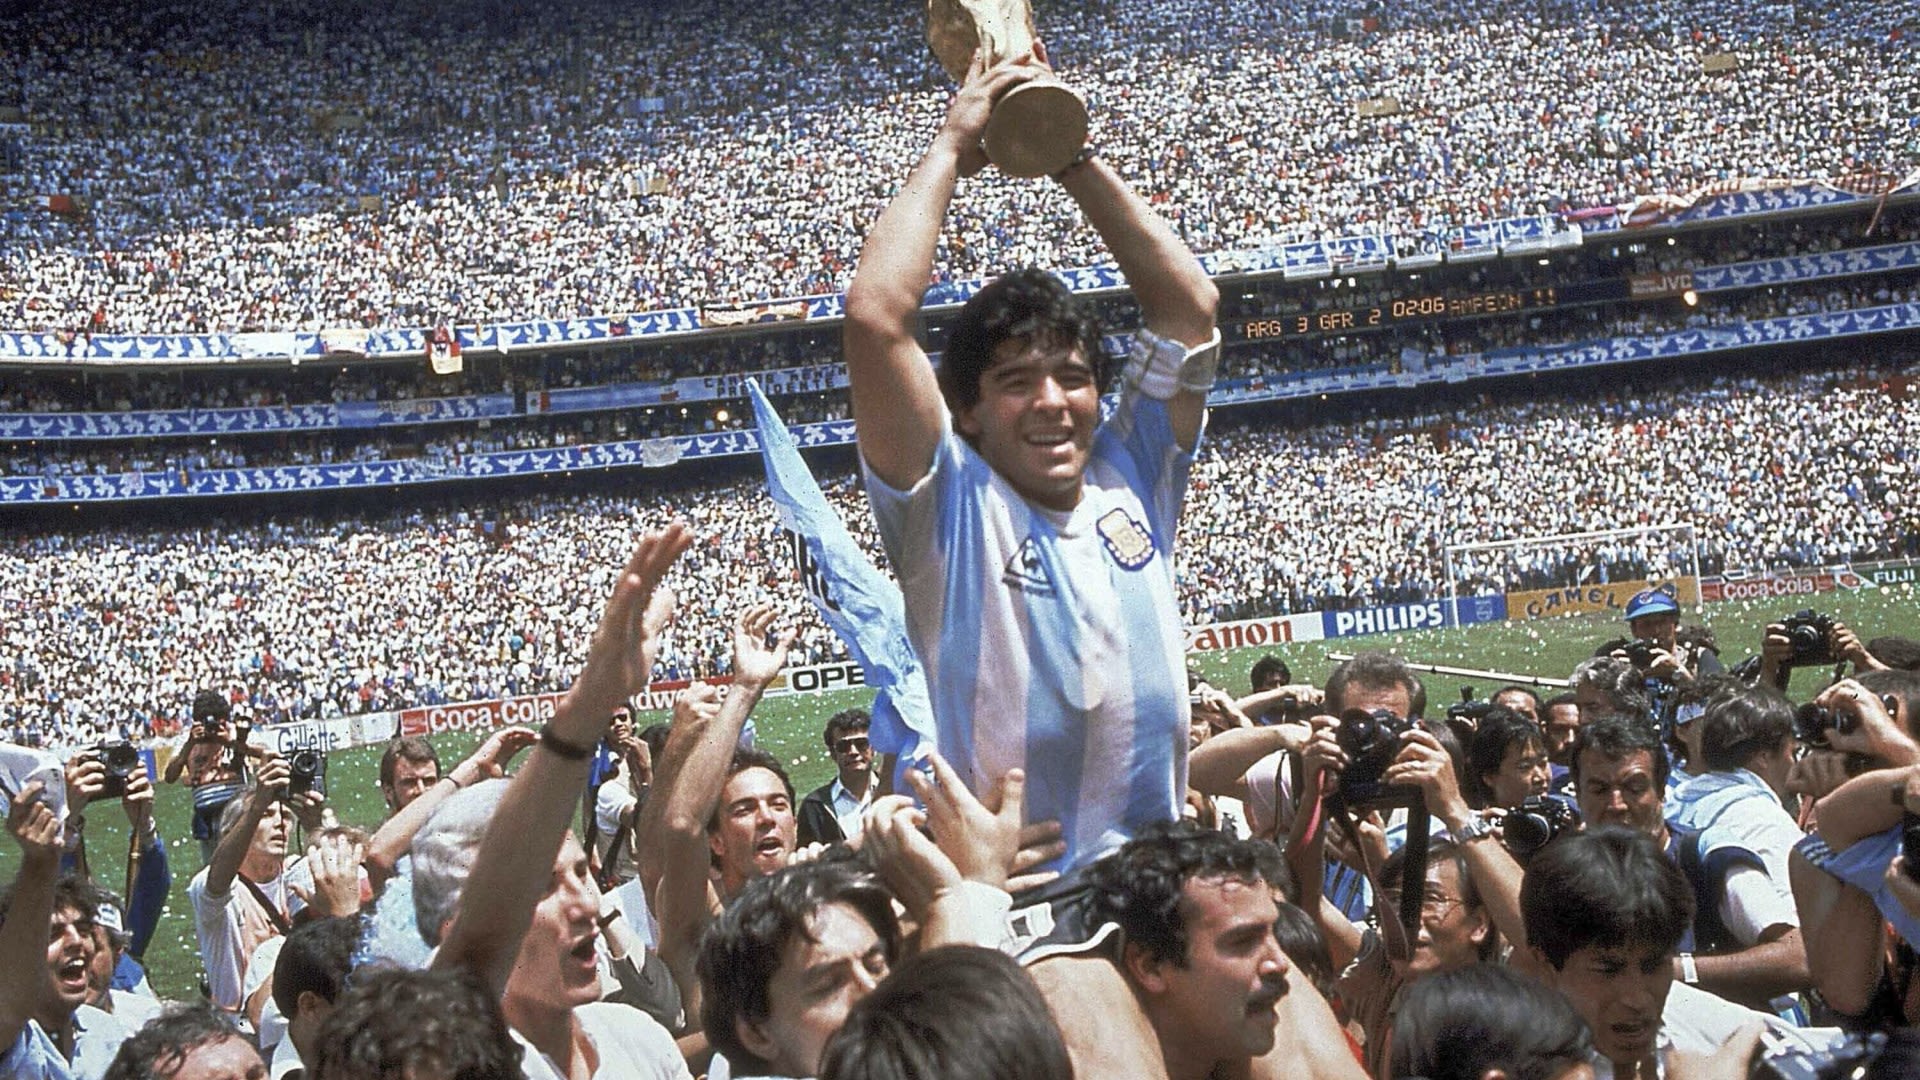 'Stolen' trophy won by football legend Diego Maradona to 'sell for millions'